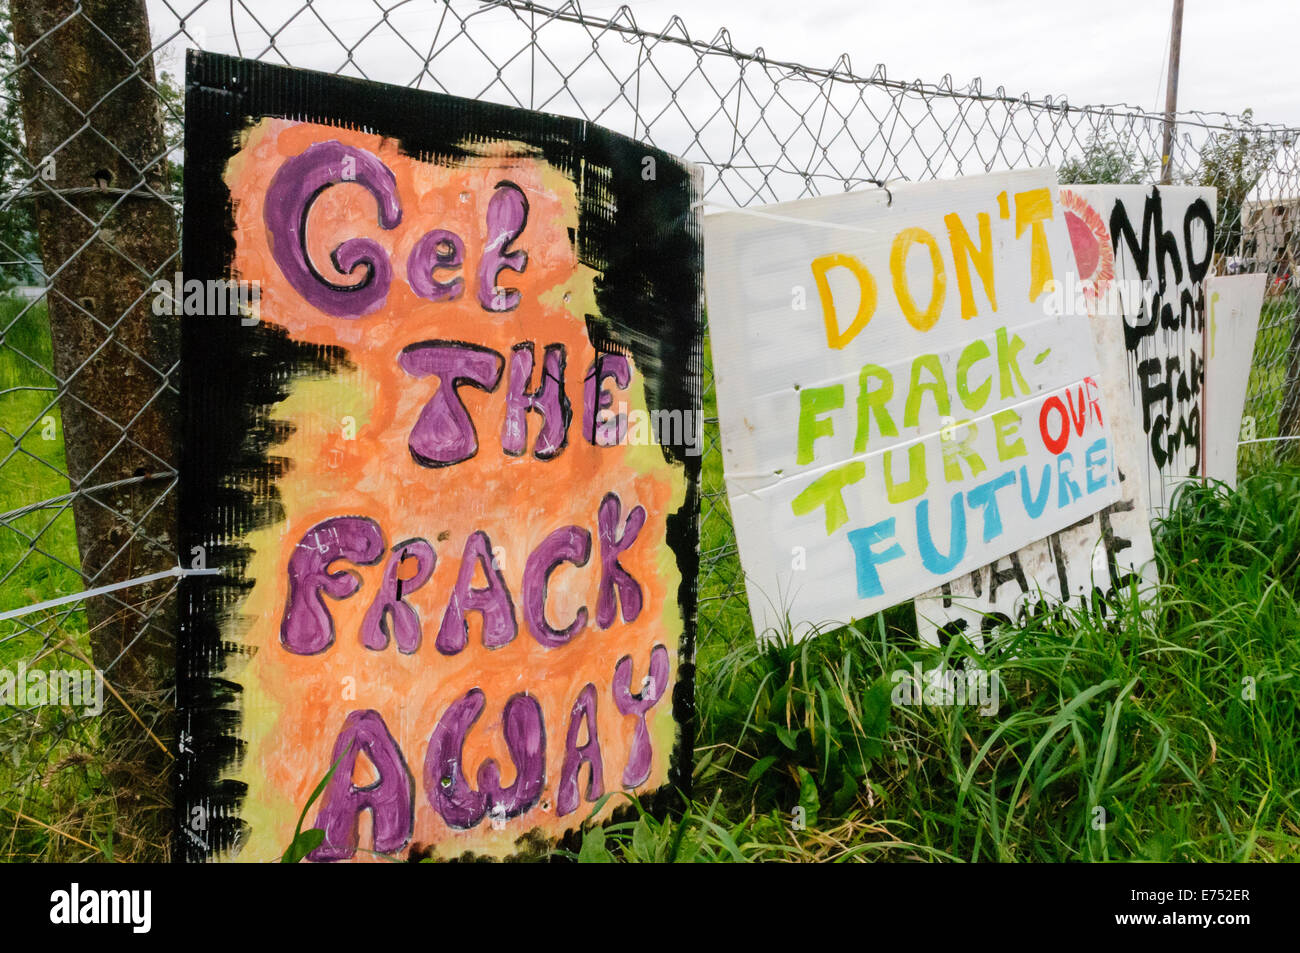 Belcoo, Northern Ireland. 2nd September 2014 - Signs on the fence at an anti-Fracking campaign at quarry owned by Tamboran Stock Photo